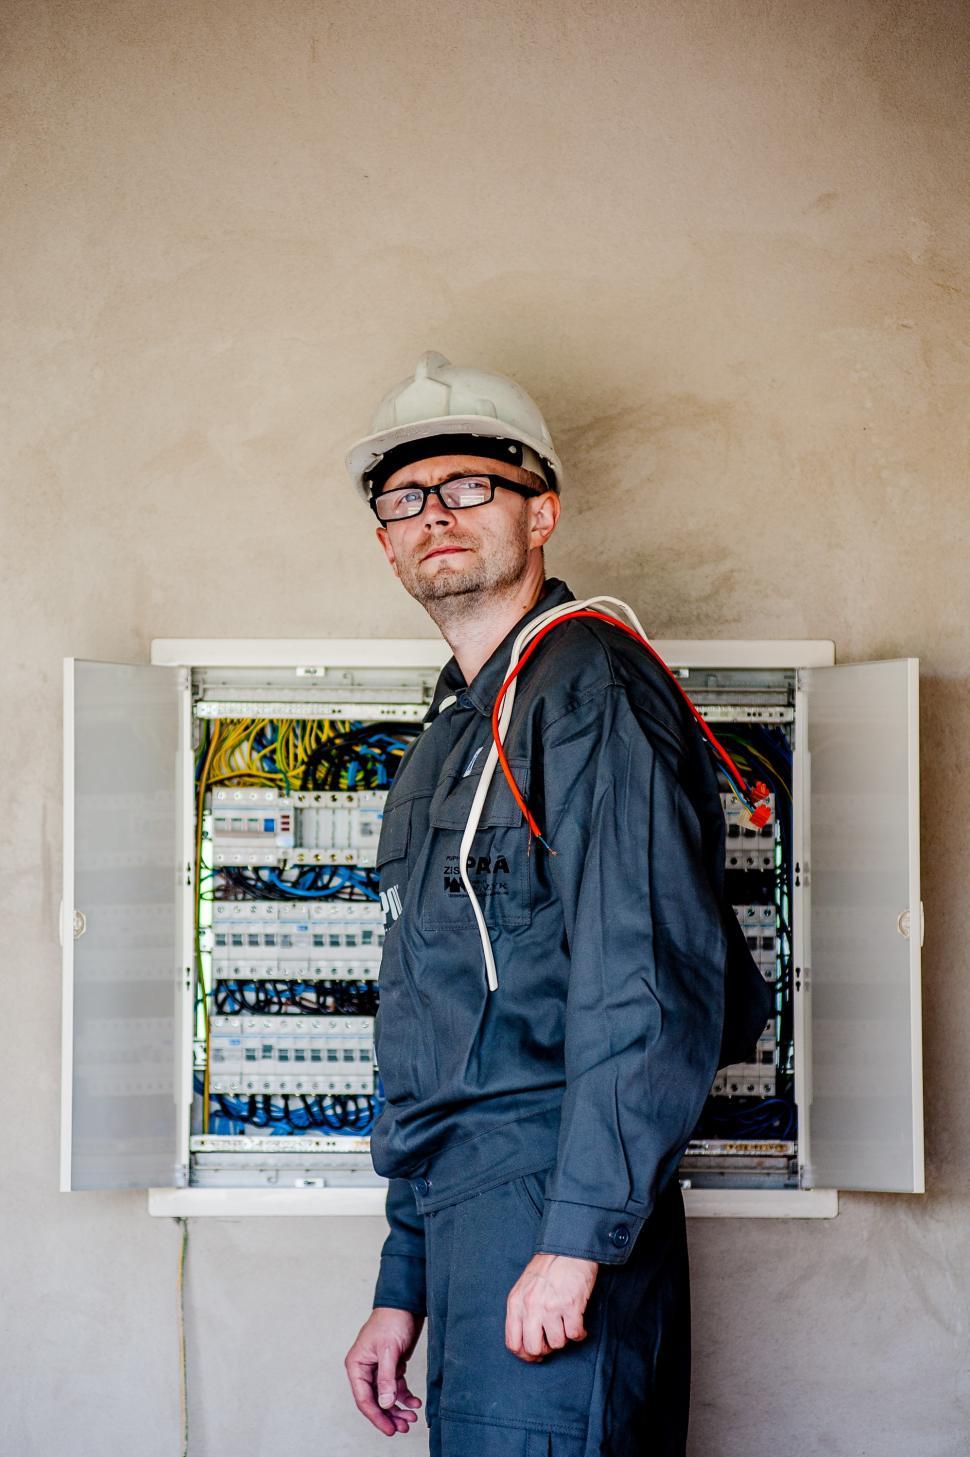 Free Image of Man in Hard Hat and Glasses at Electrical Panel 